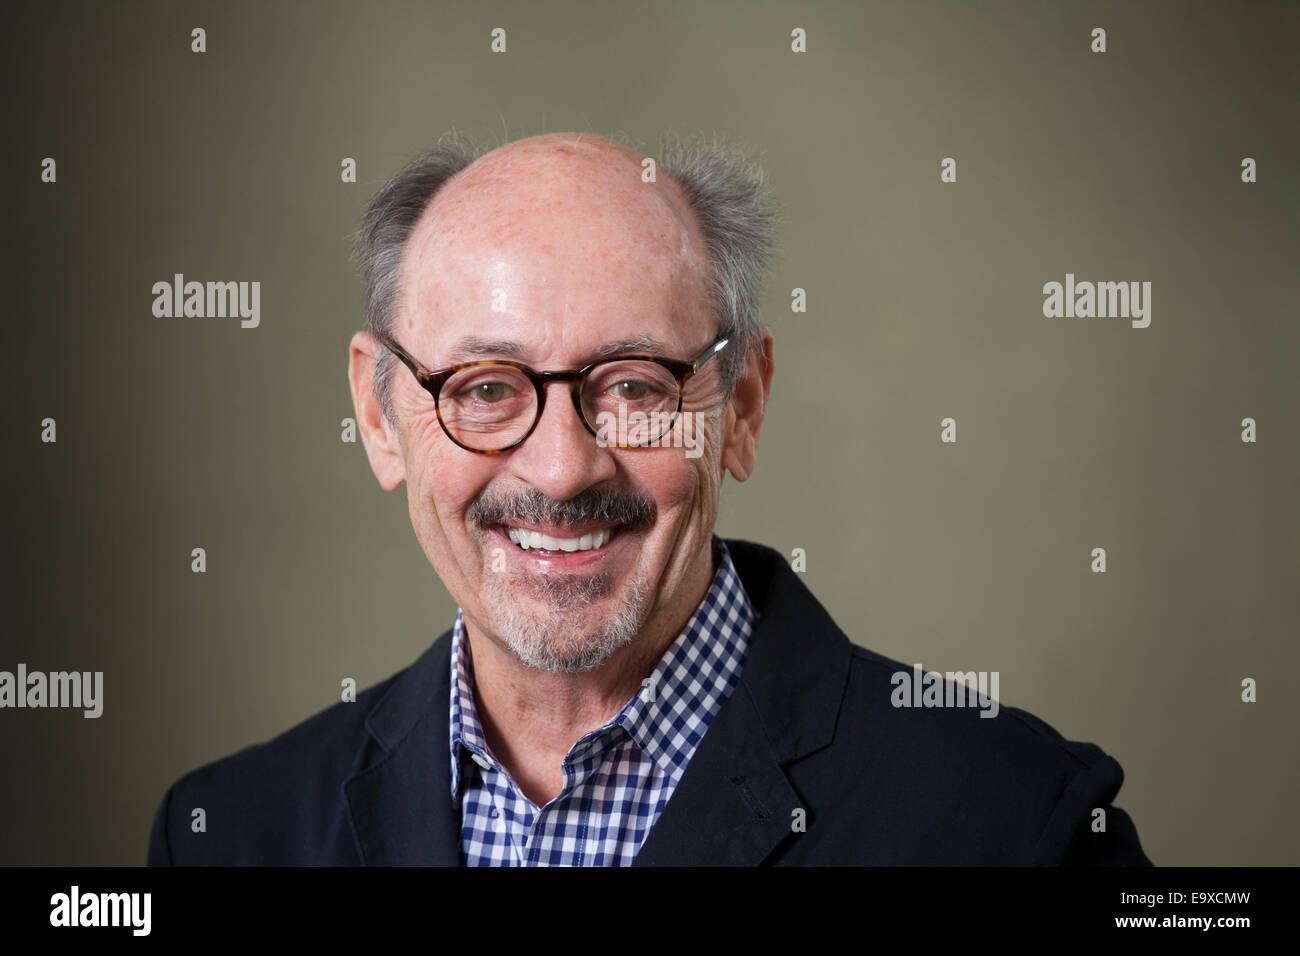 Billy Collins, former Poet Laureate of the United States, at the ...